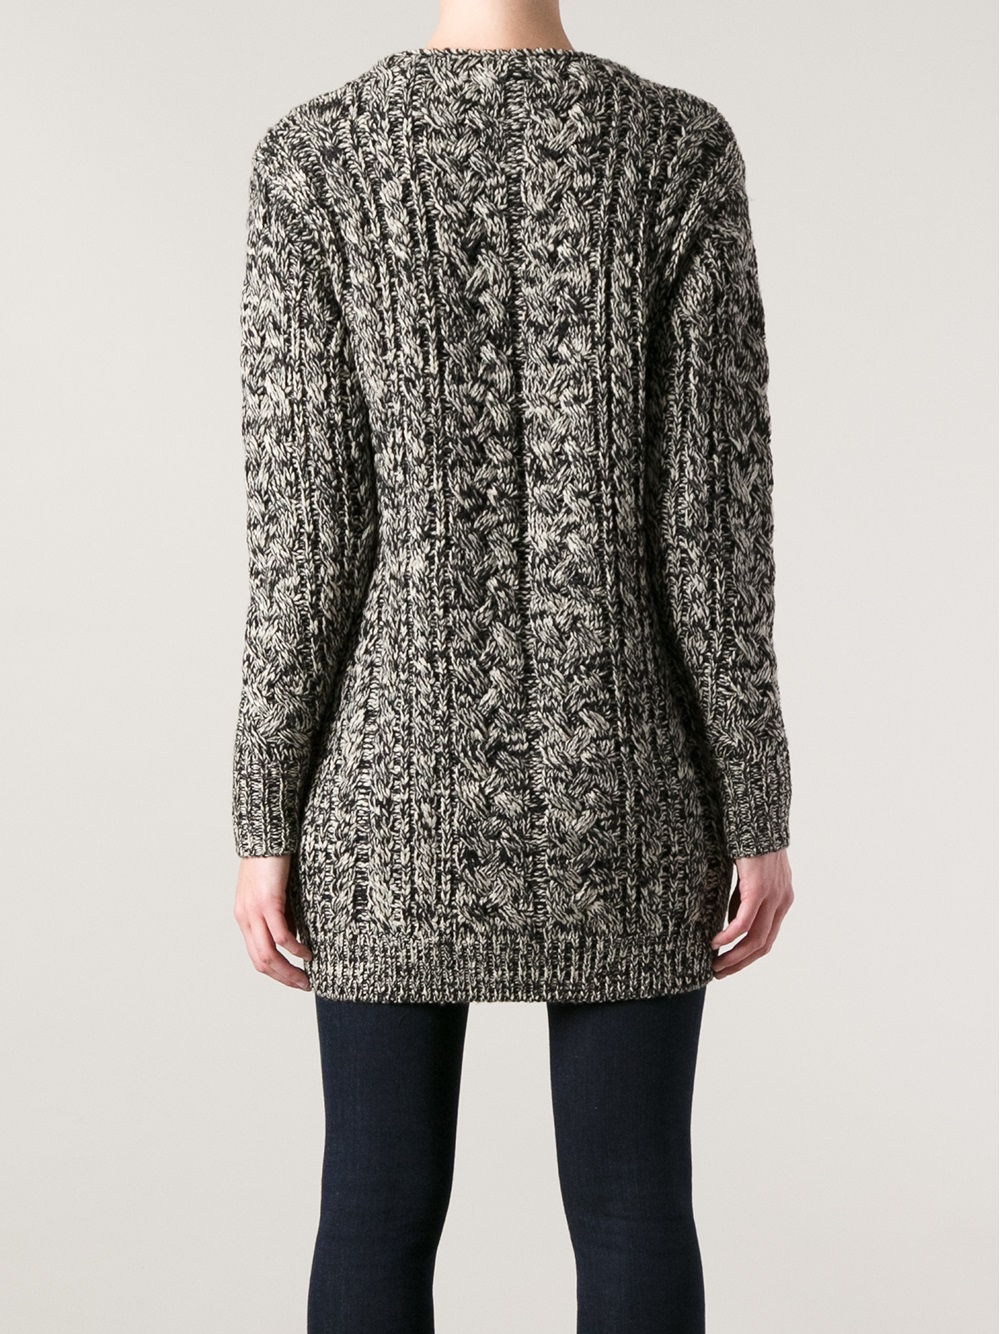 Lyst - Étoile Isabel Marant Chunky Knit Cardigan in Brown